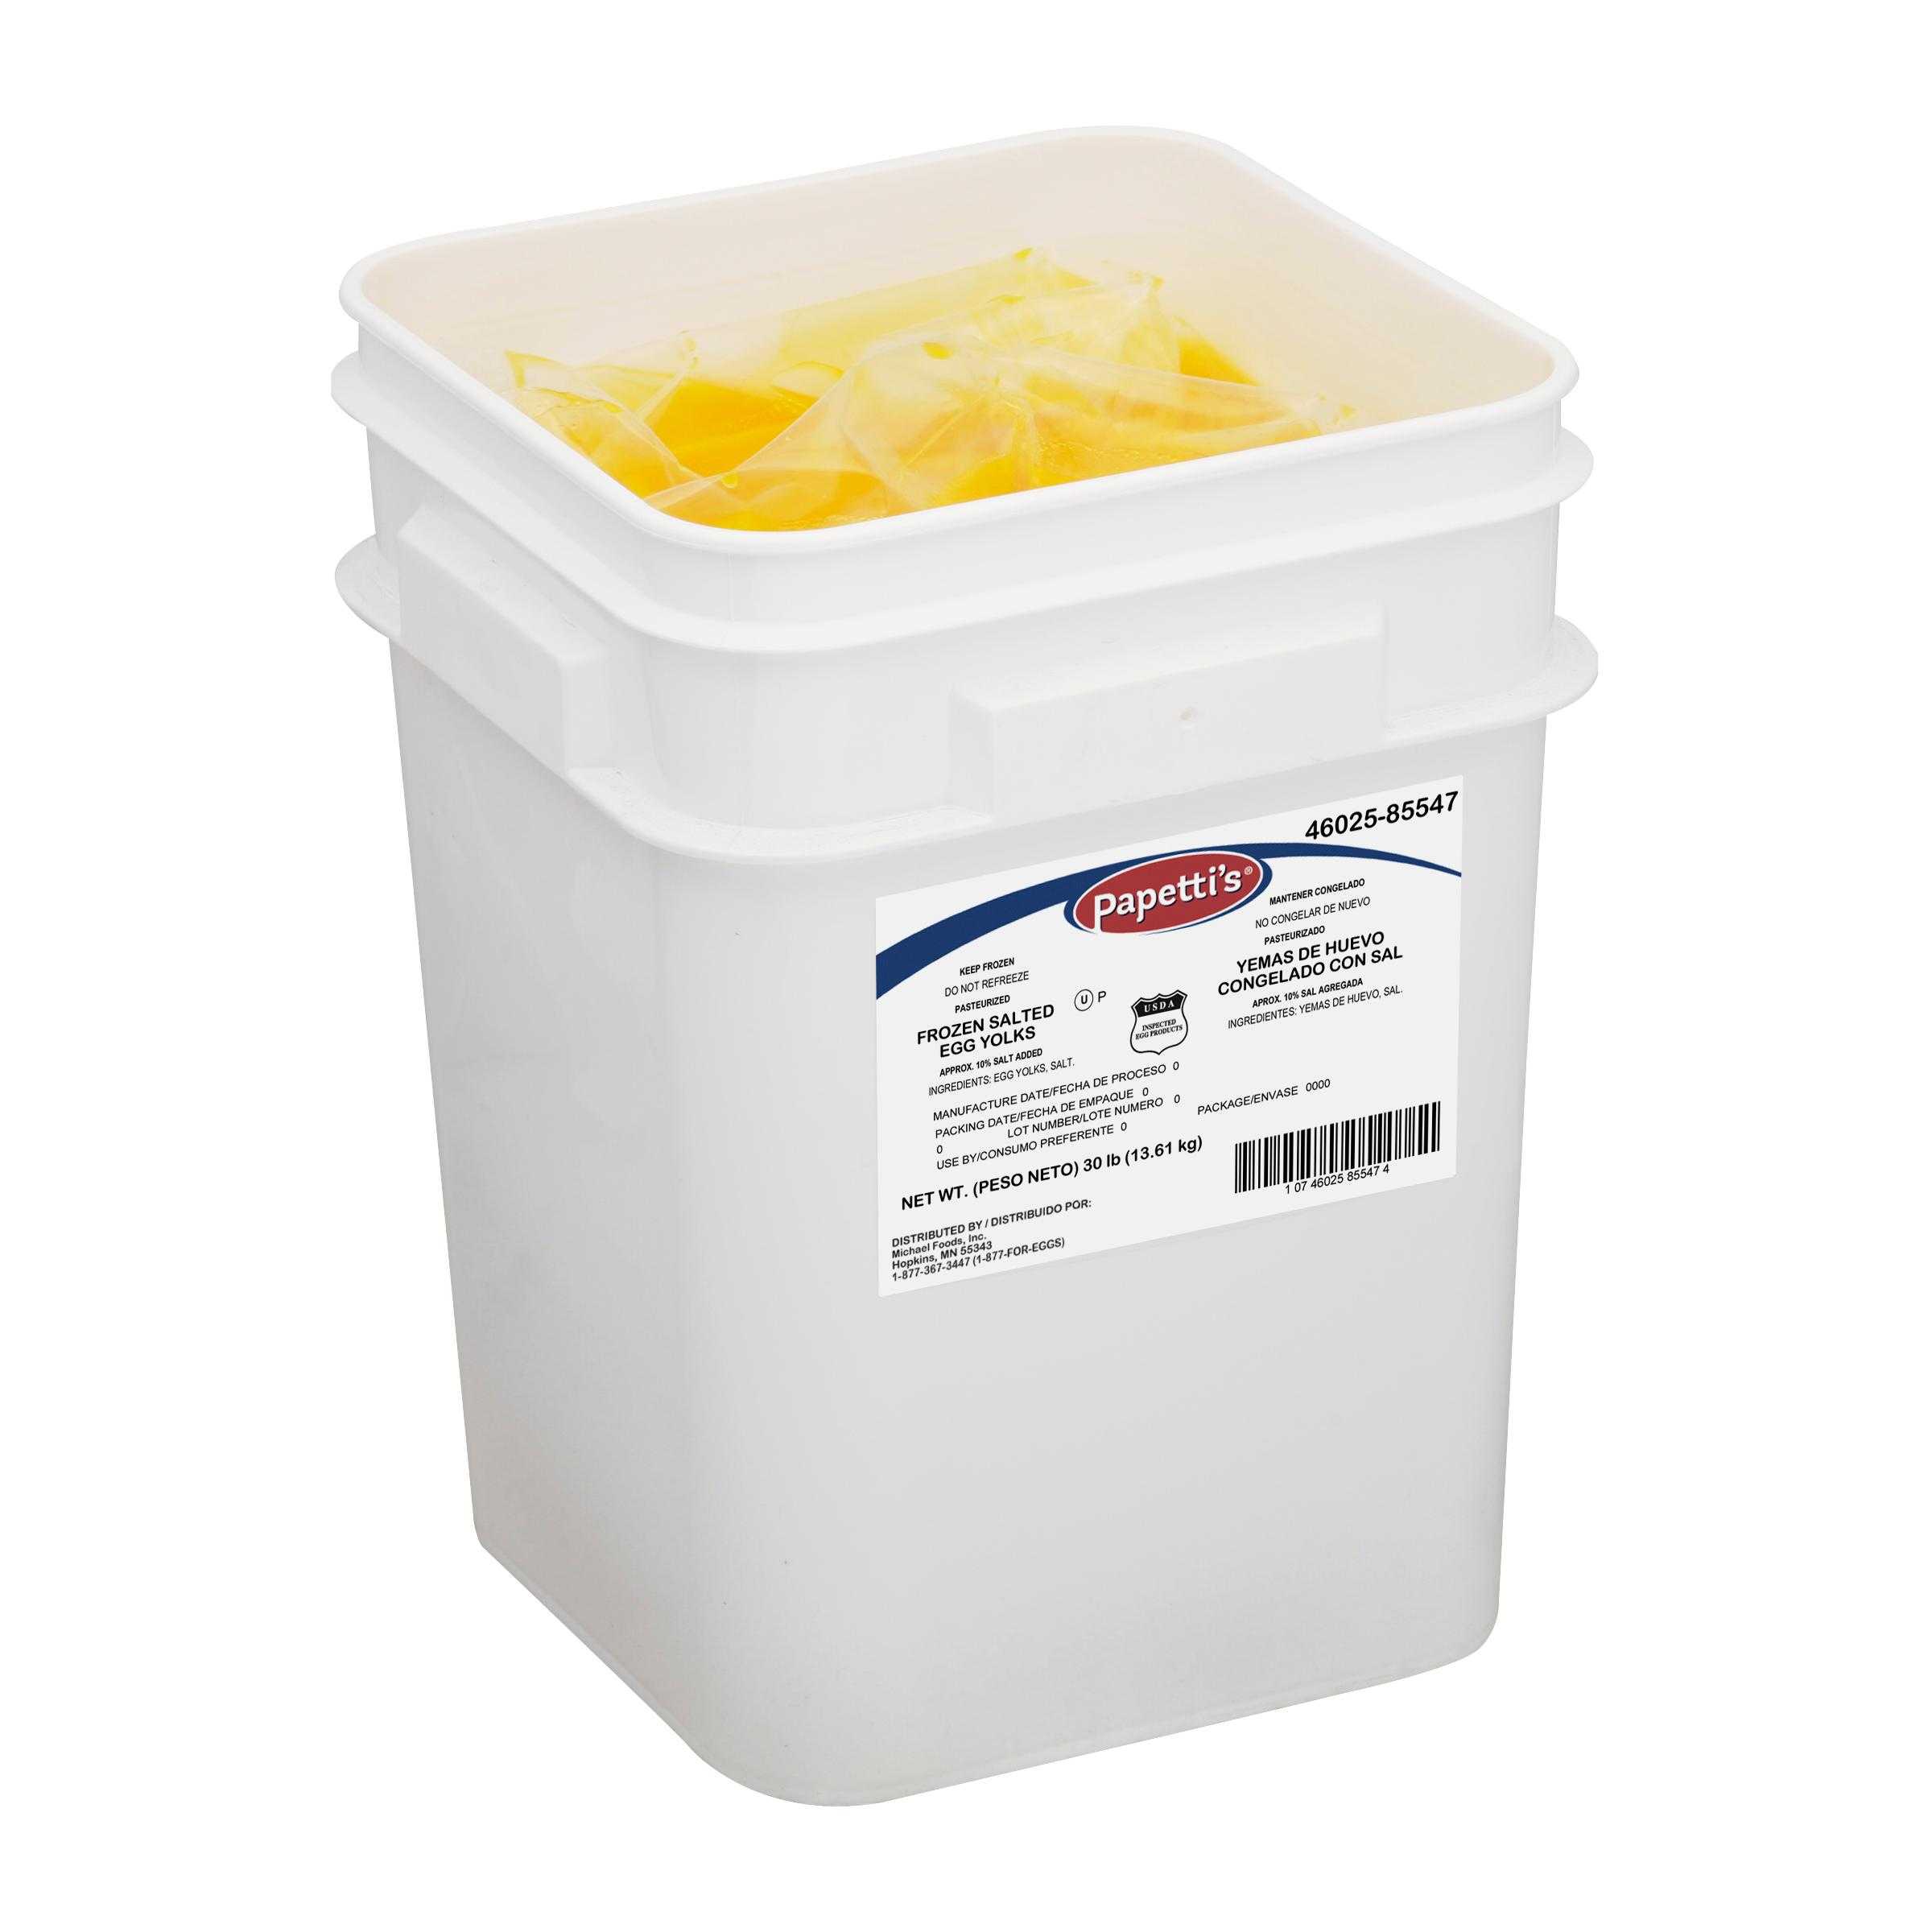 Papetti’s® Frozen Liquid Egg Yolks with 10% Salt, 1/30 Lb Square Tub with Liner